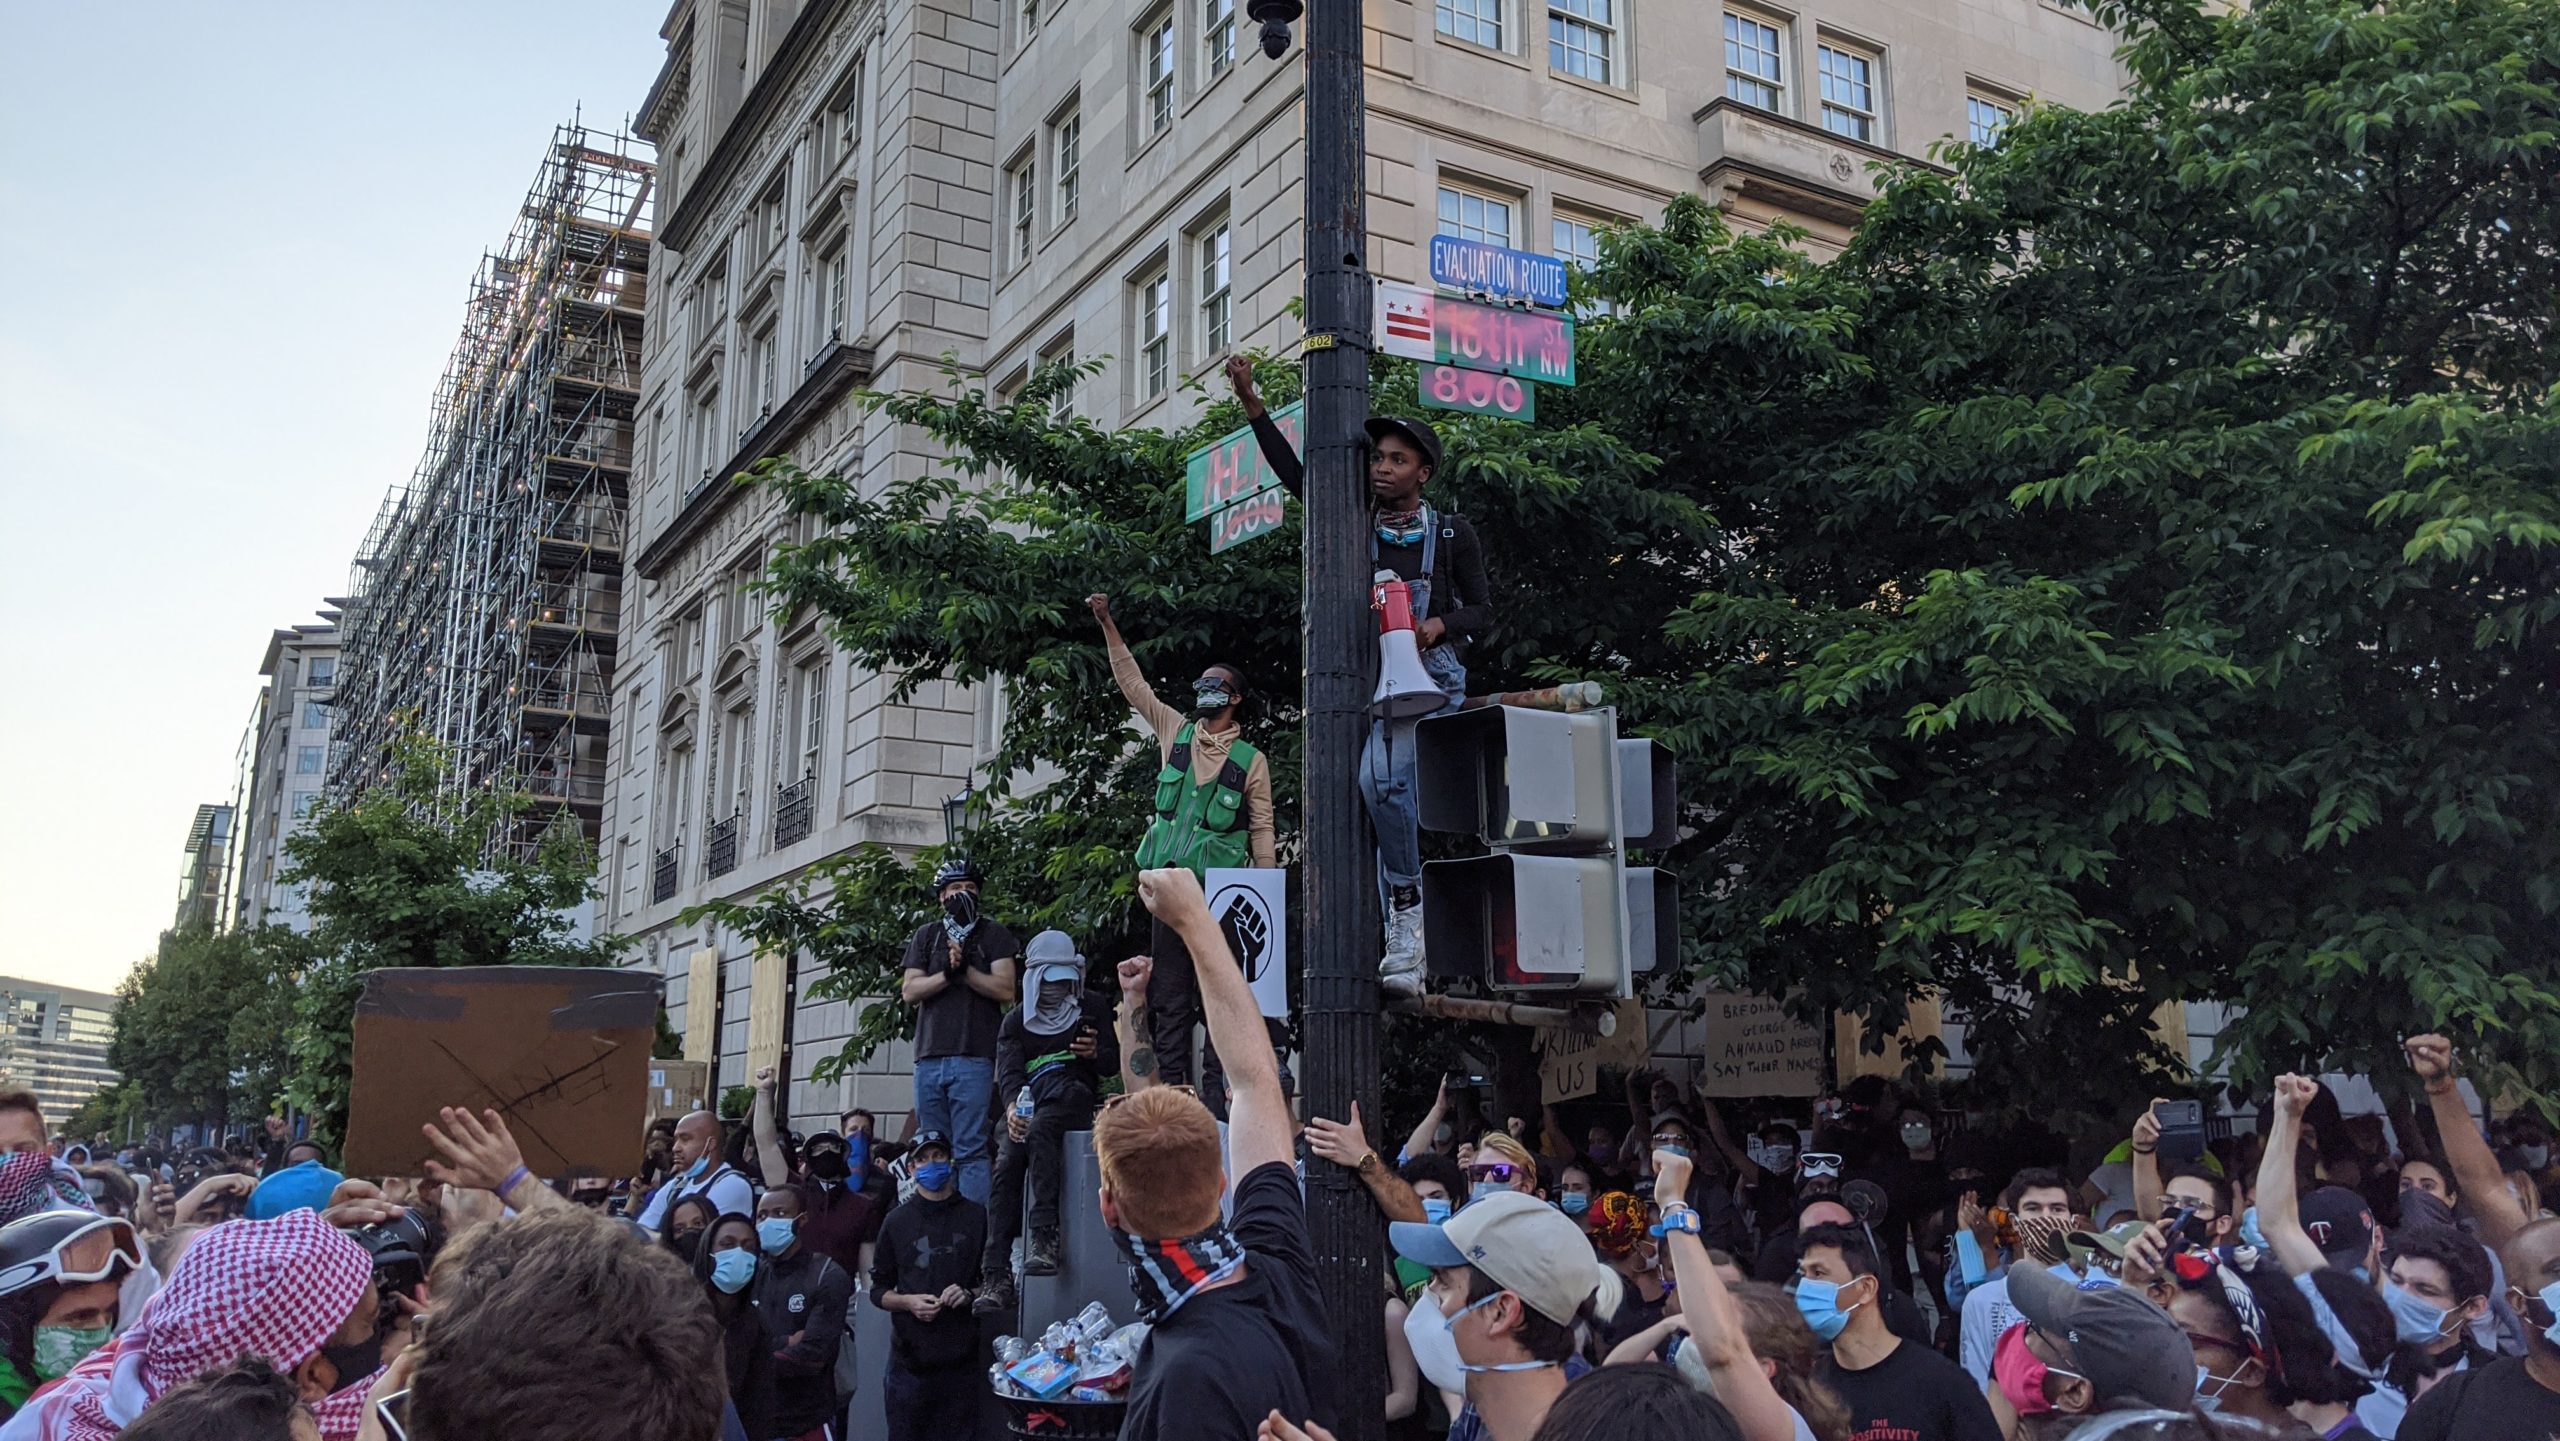 Protest organisers scale a stoplight outside LaFayette Square in DC on June 2. (Photo: Tom McKay, Gizmodo)